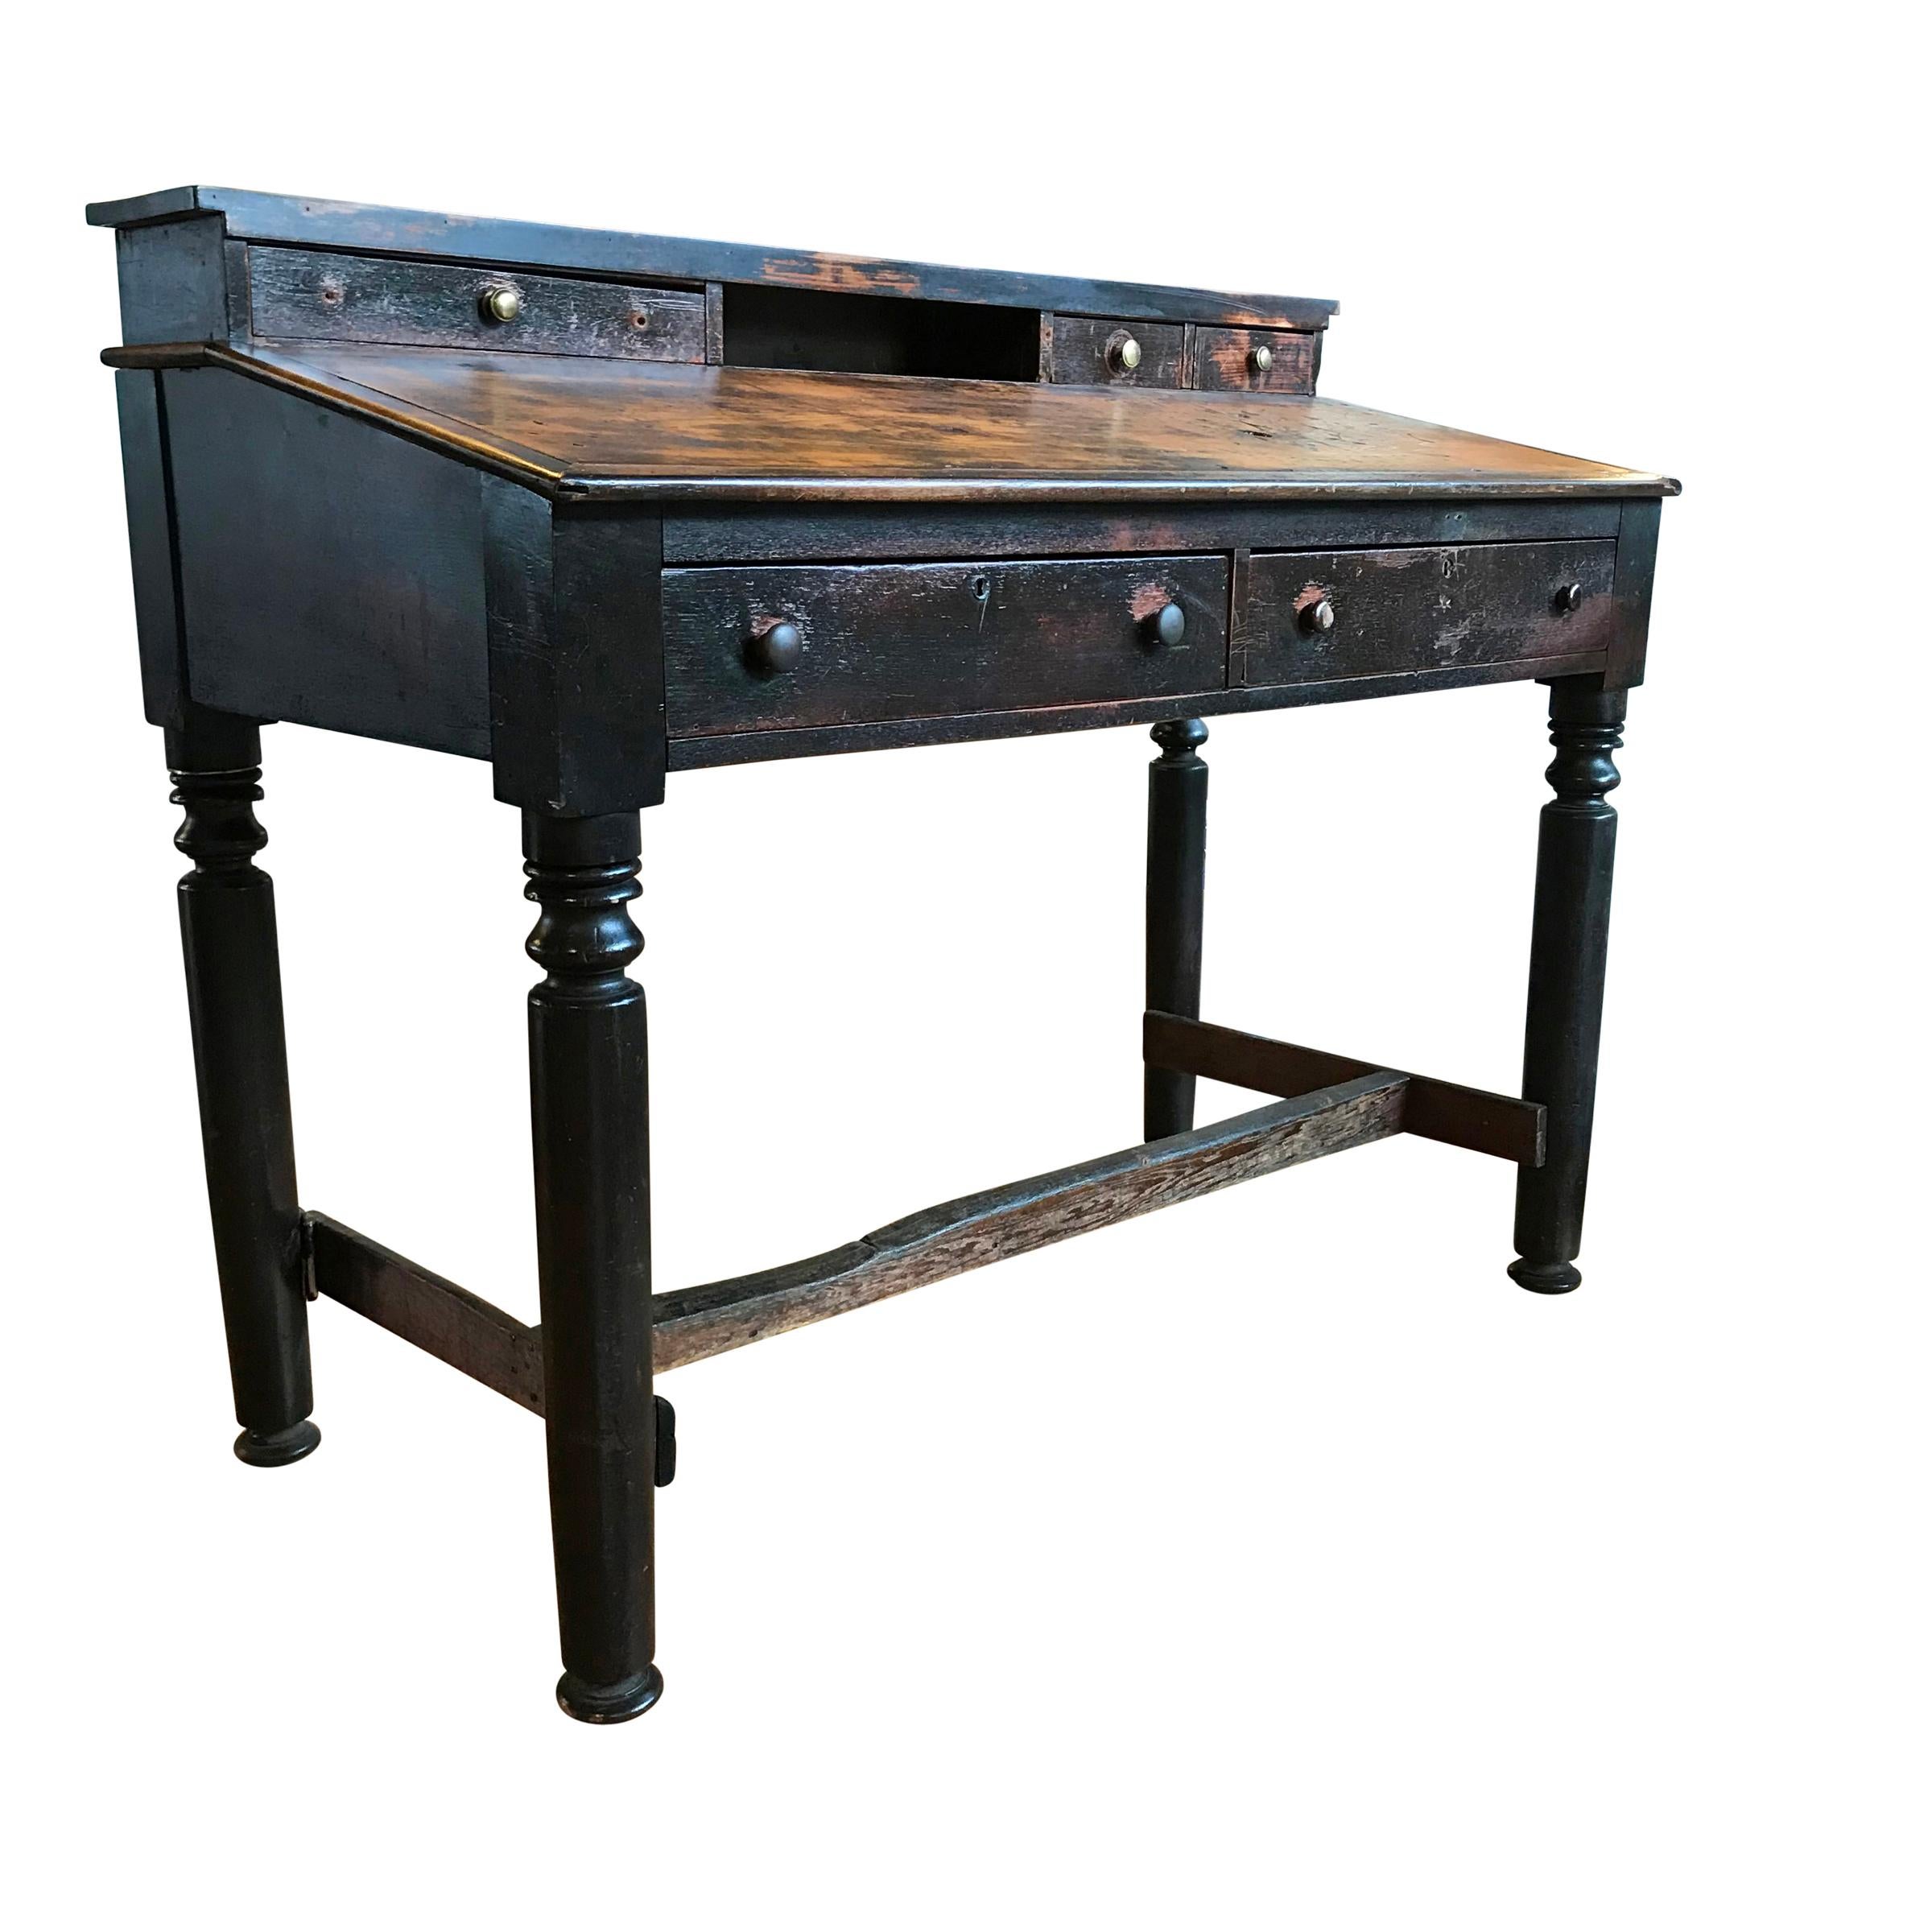 An early 20th century American factory foreman's desk with a slant top, three small drawers on top, and two large drawers below. The wear on the stretchers is remarkable, and clearly shows that the foreman stood on the left of the table for many